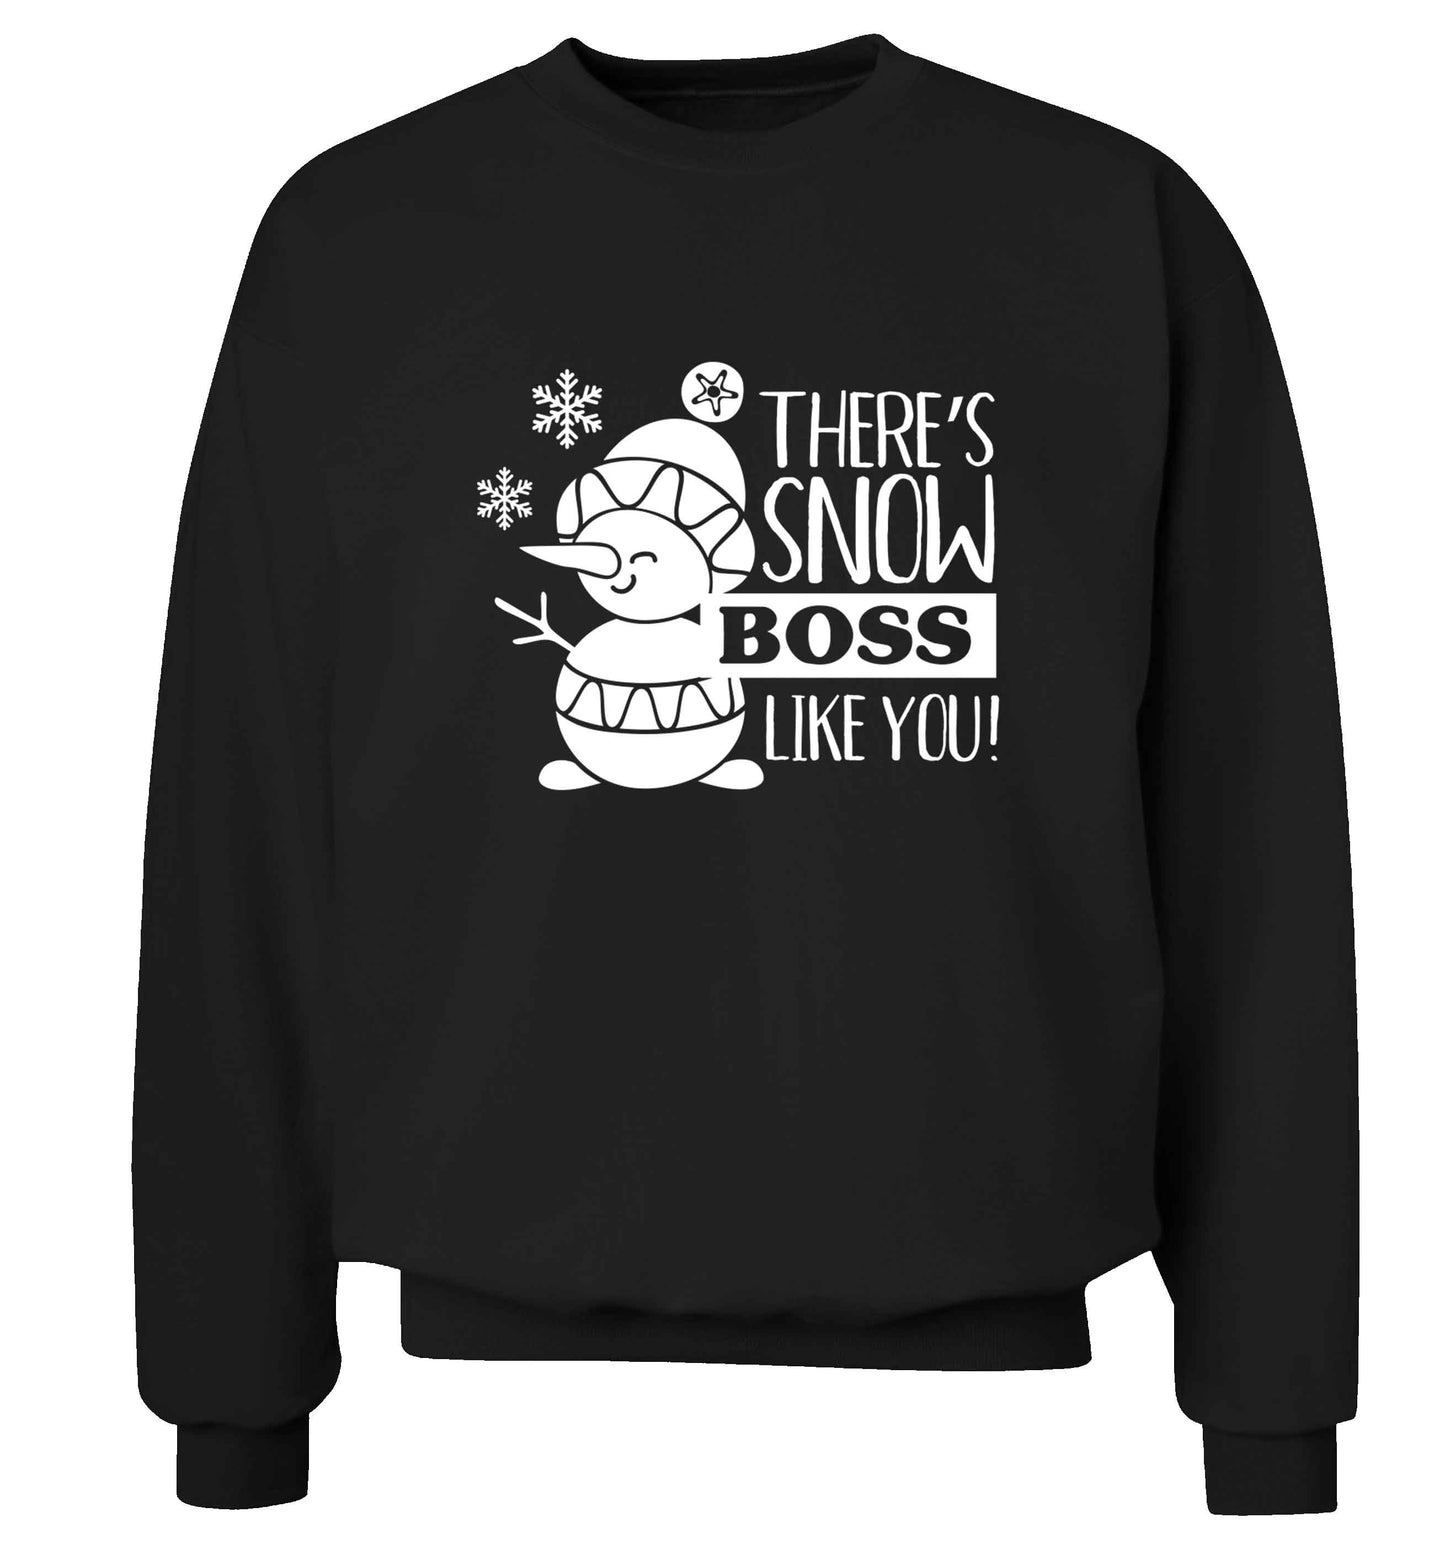 There's snow boss like you adult's unisex black sweater 2XL